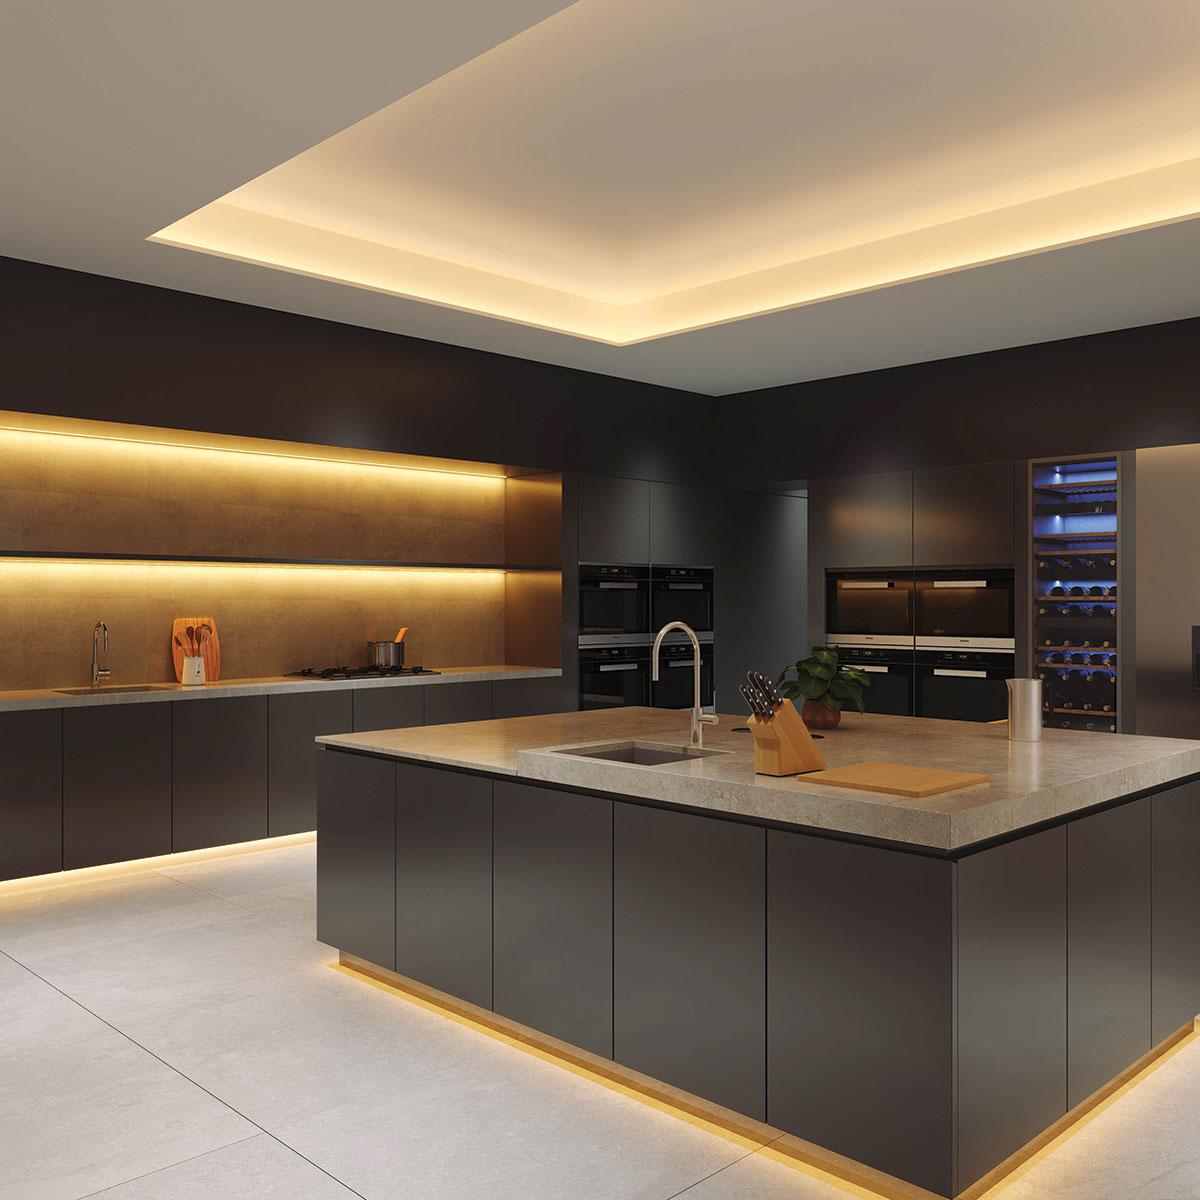 Benefits of LED and Strip Under Cabinet Lighting